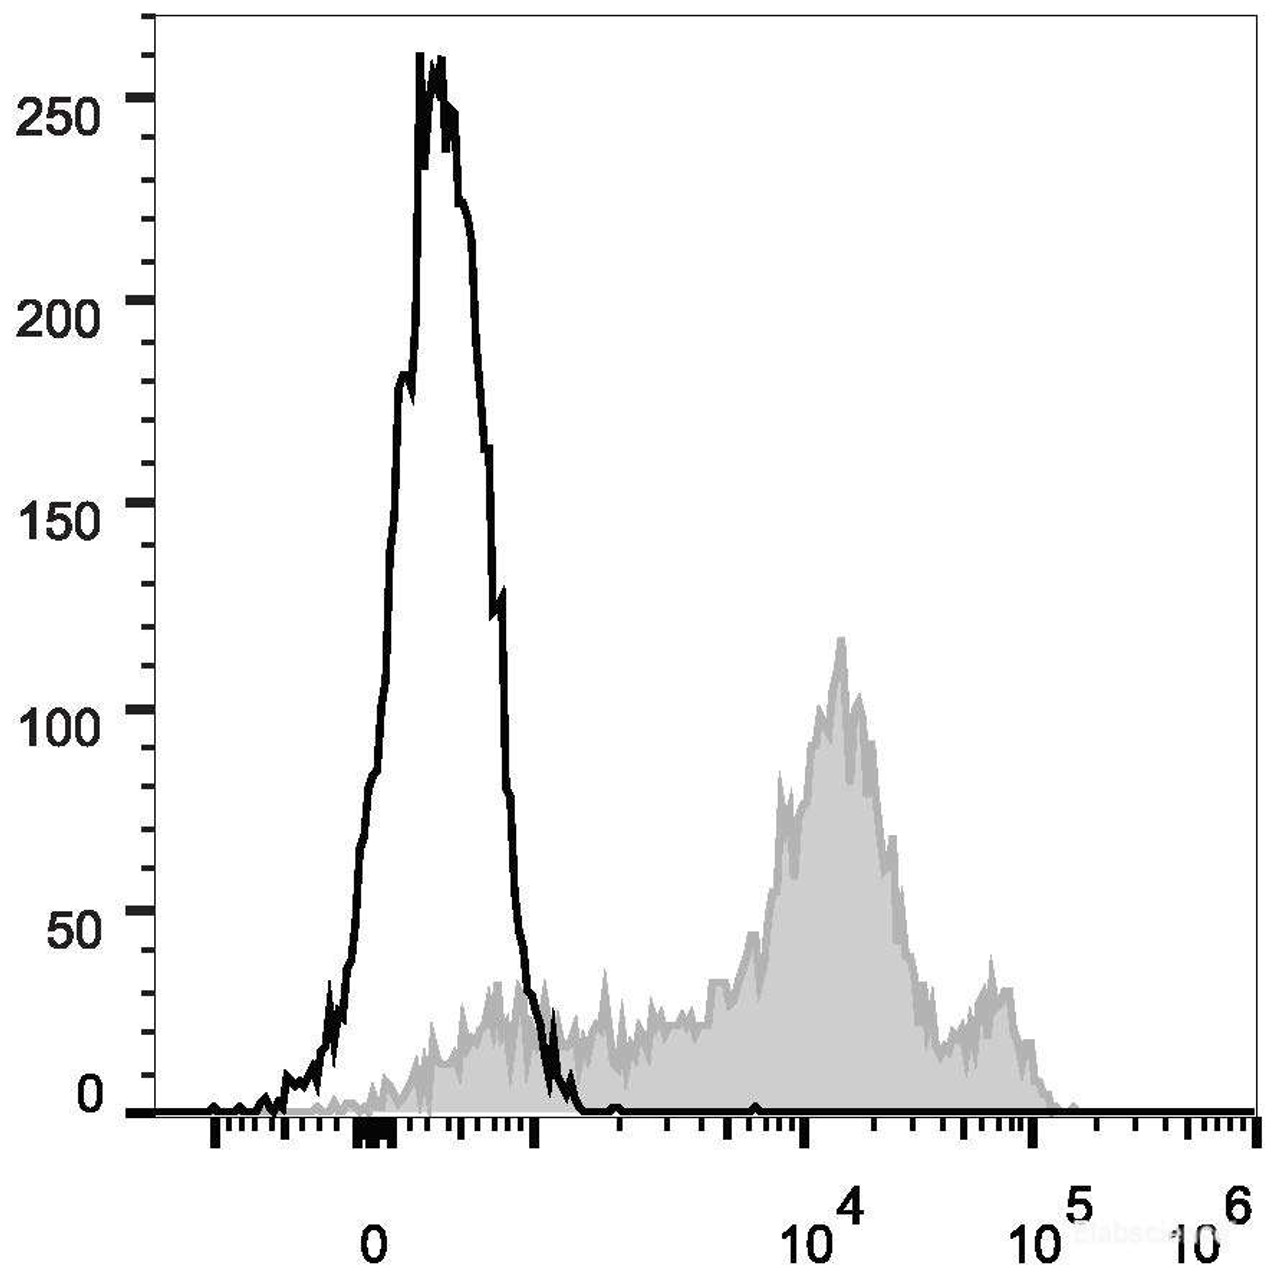 C57BL/6 murine splenocytes are stained with FITC Anti-Mouse/Human CD44 Antibody[Used at .2 μg/1<sup>6</sup> cells dilution](filled gray histogram). Unstained splenocytes (empty black histogram) are used as control.